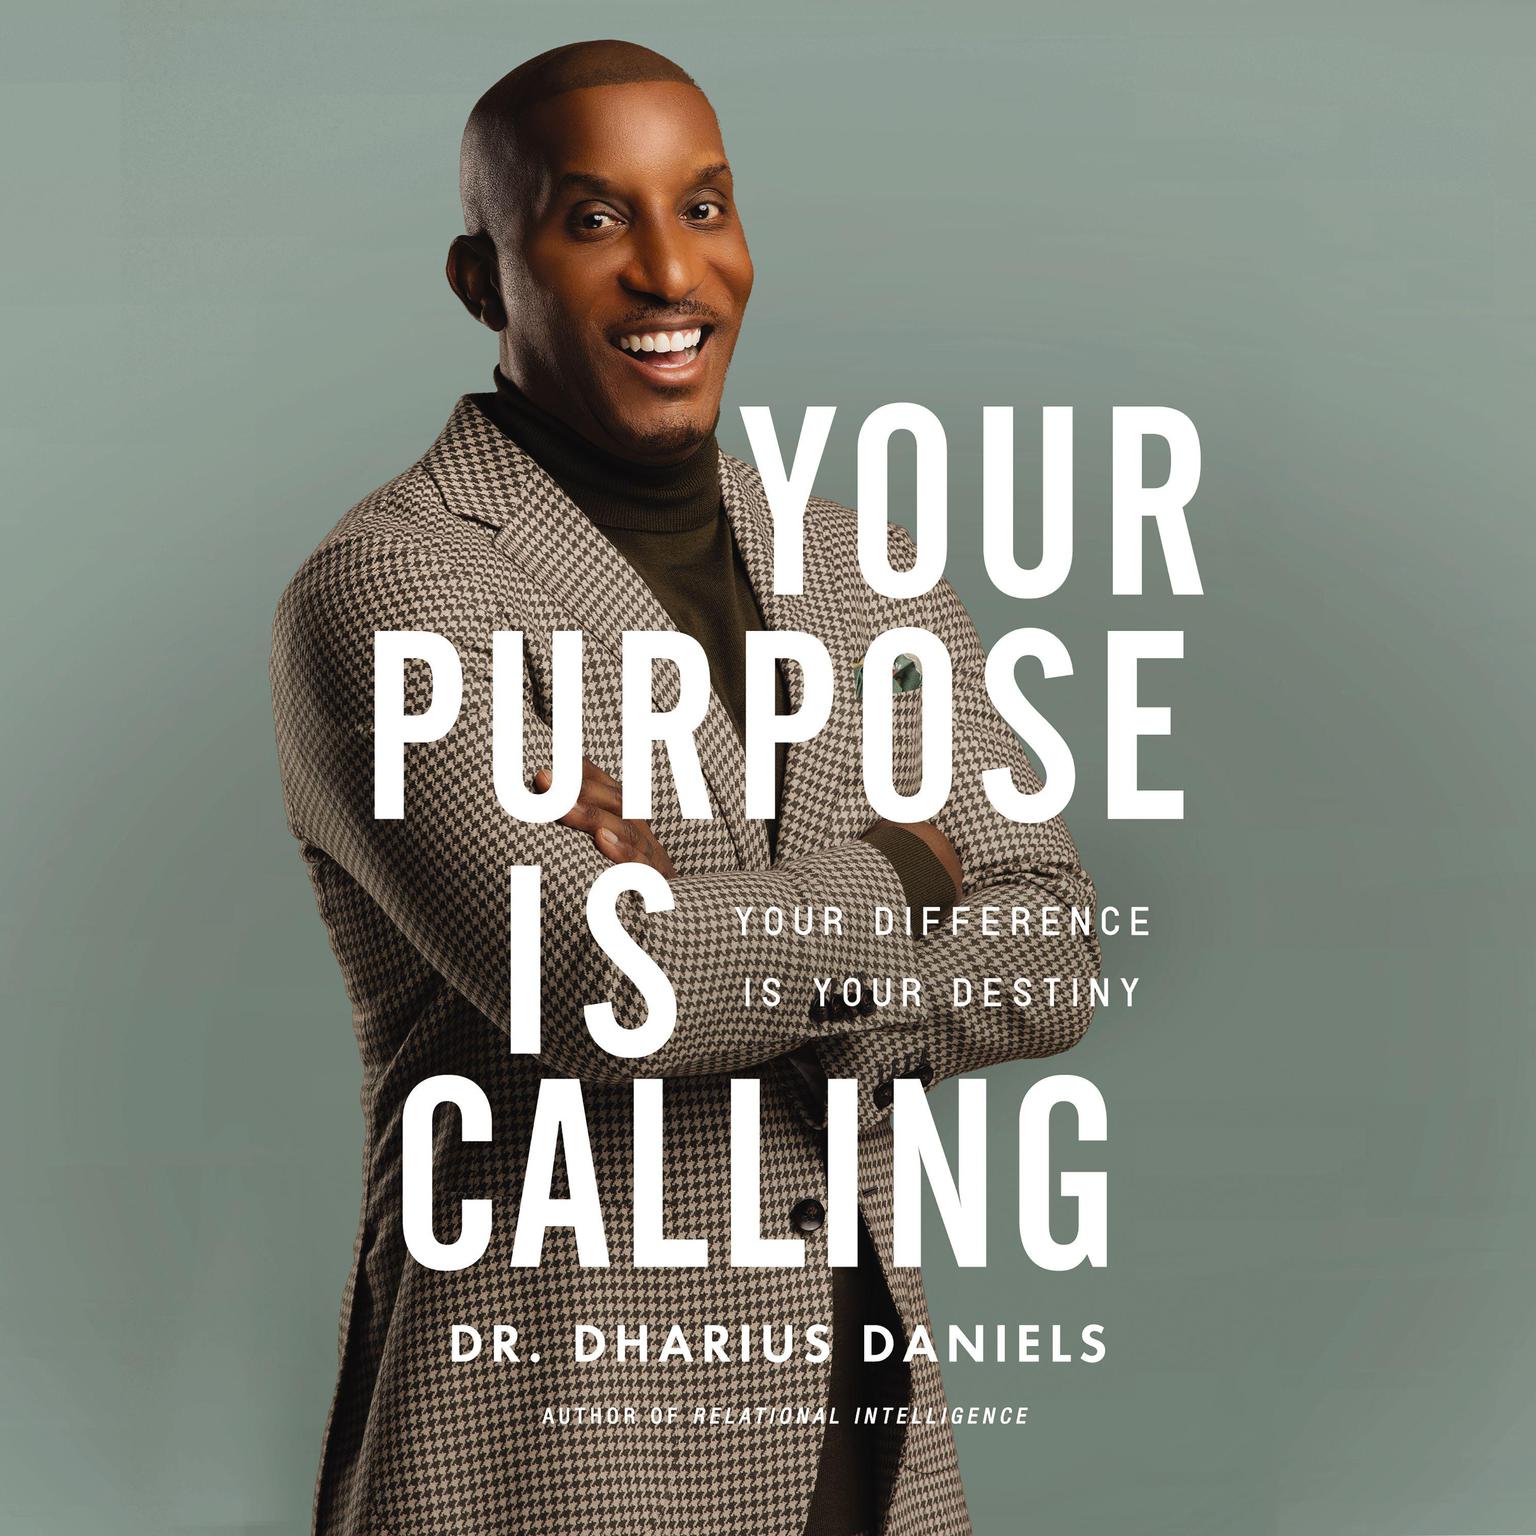 Your Purpose Is Calling: Your Difference Is Your Destiny Audiobook, by Dharius Daniels